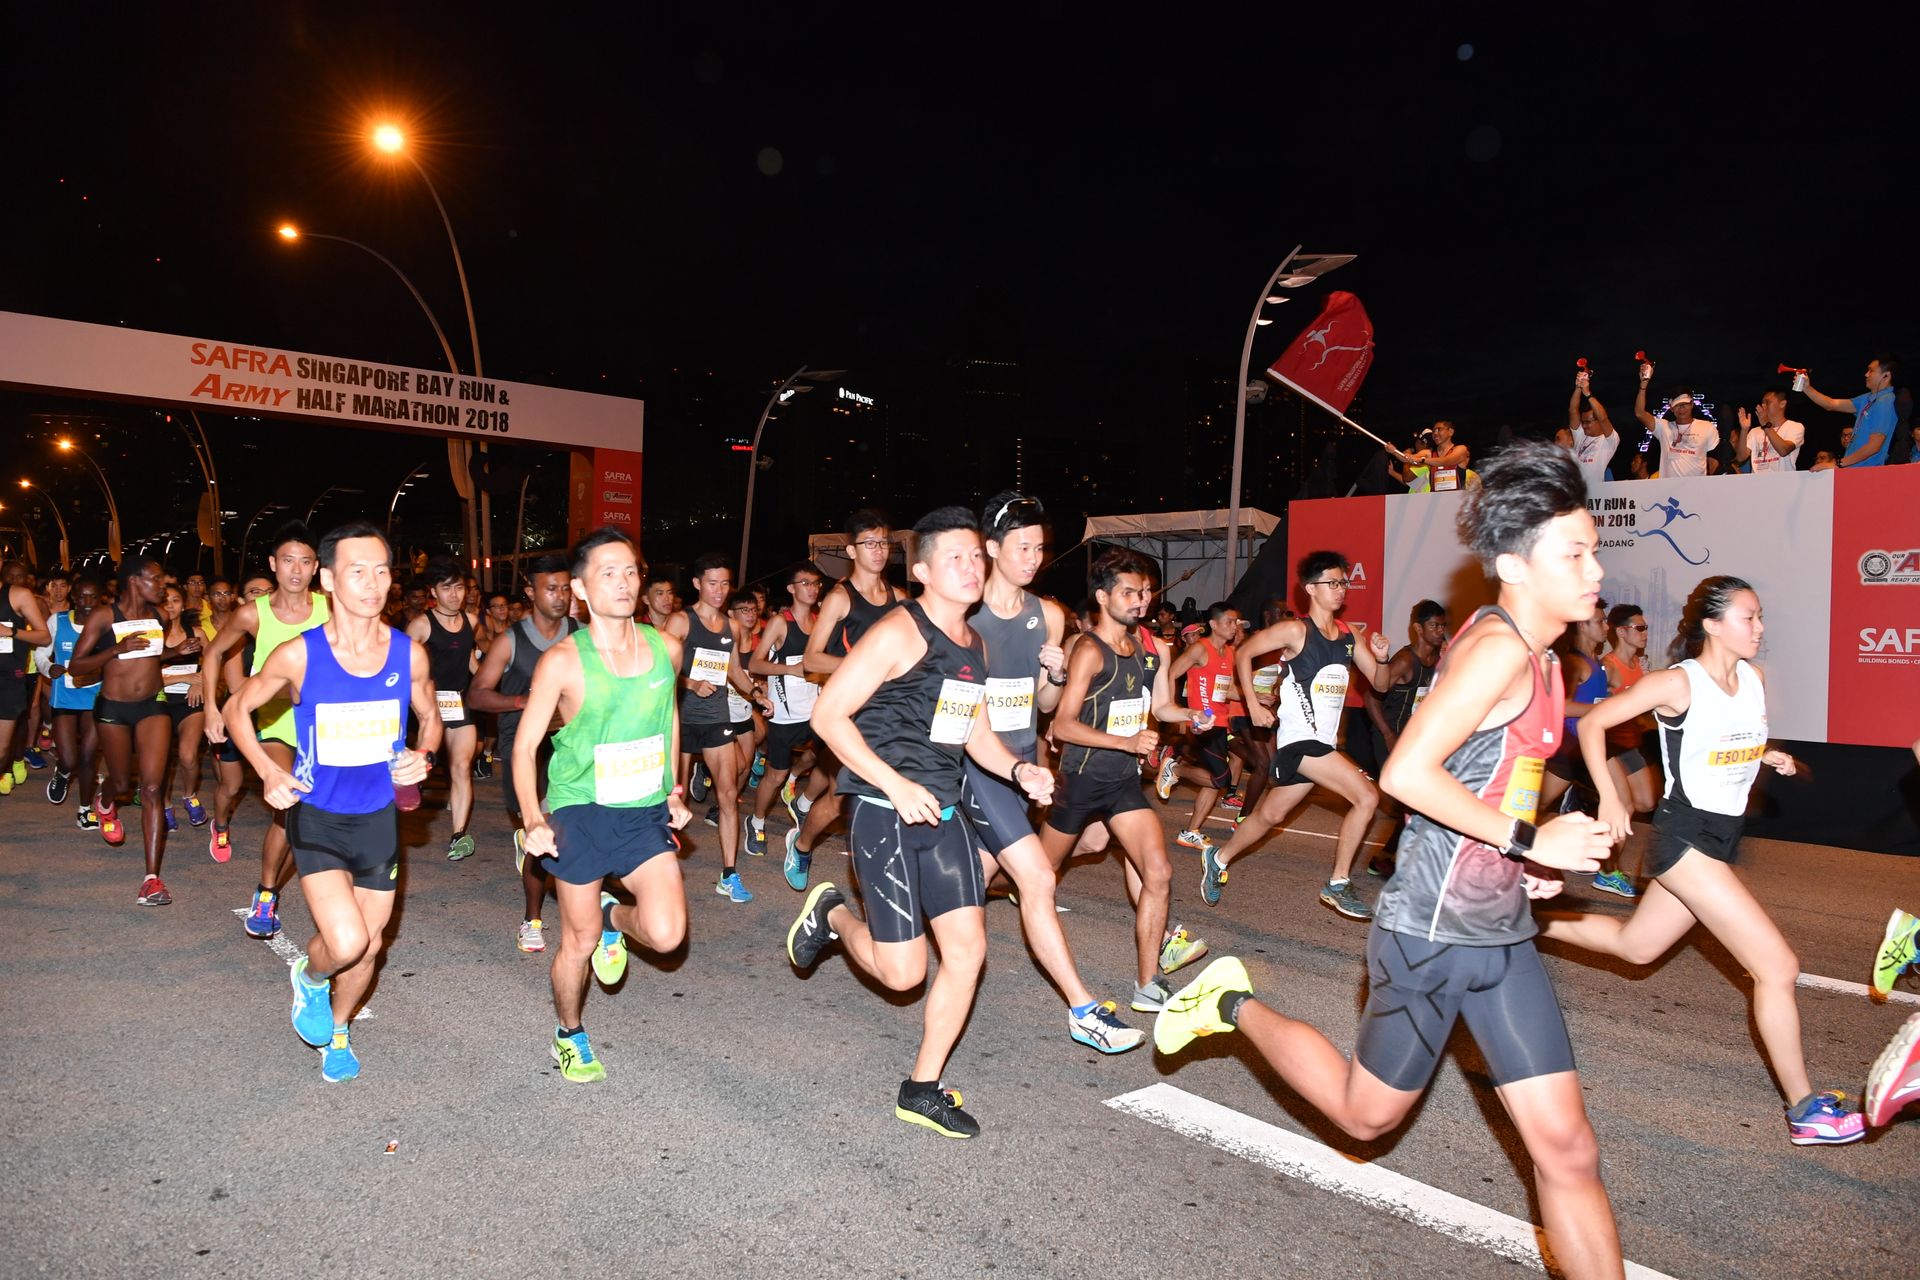 Largest number of SAF National Servicemen's families in SAFRA S'pore Bay Run and Army Half Marathon